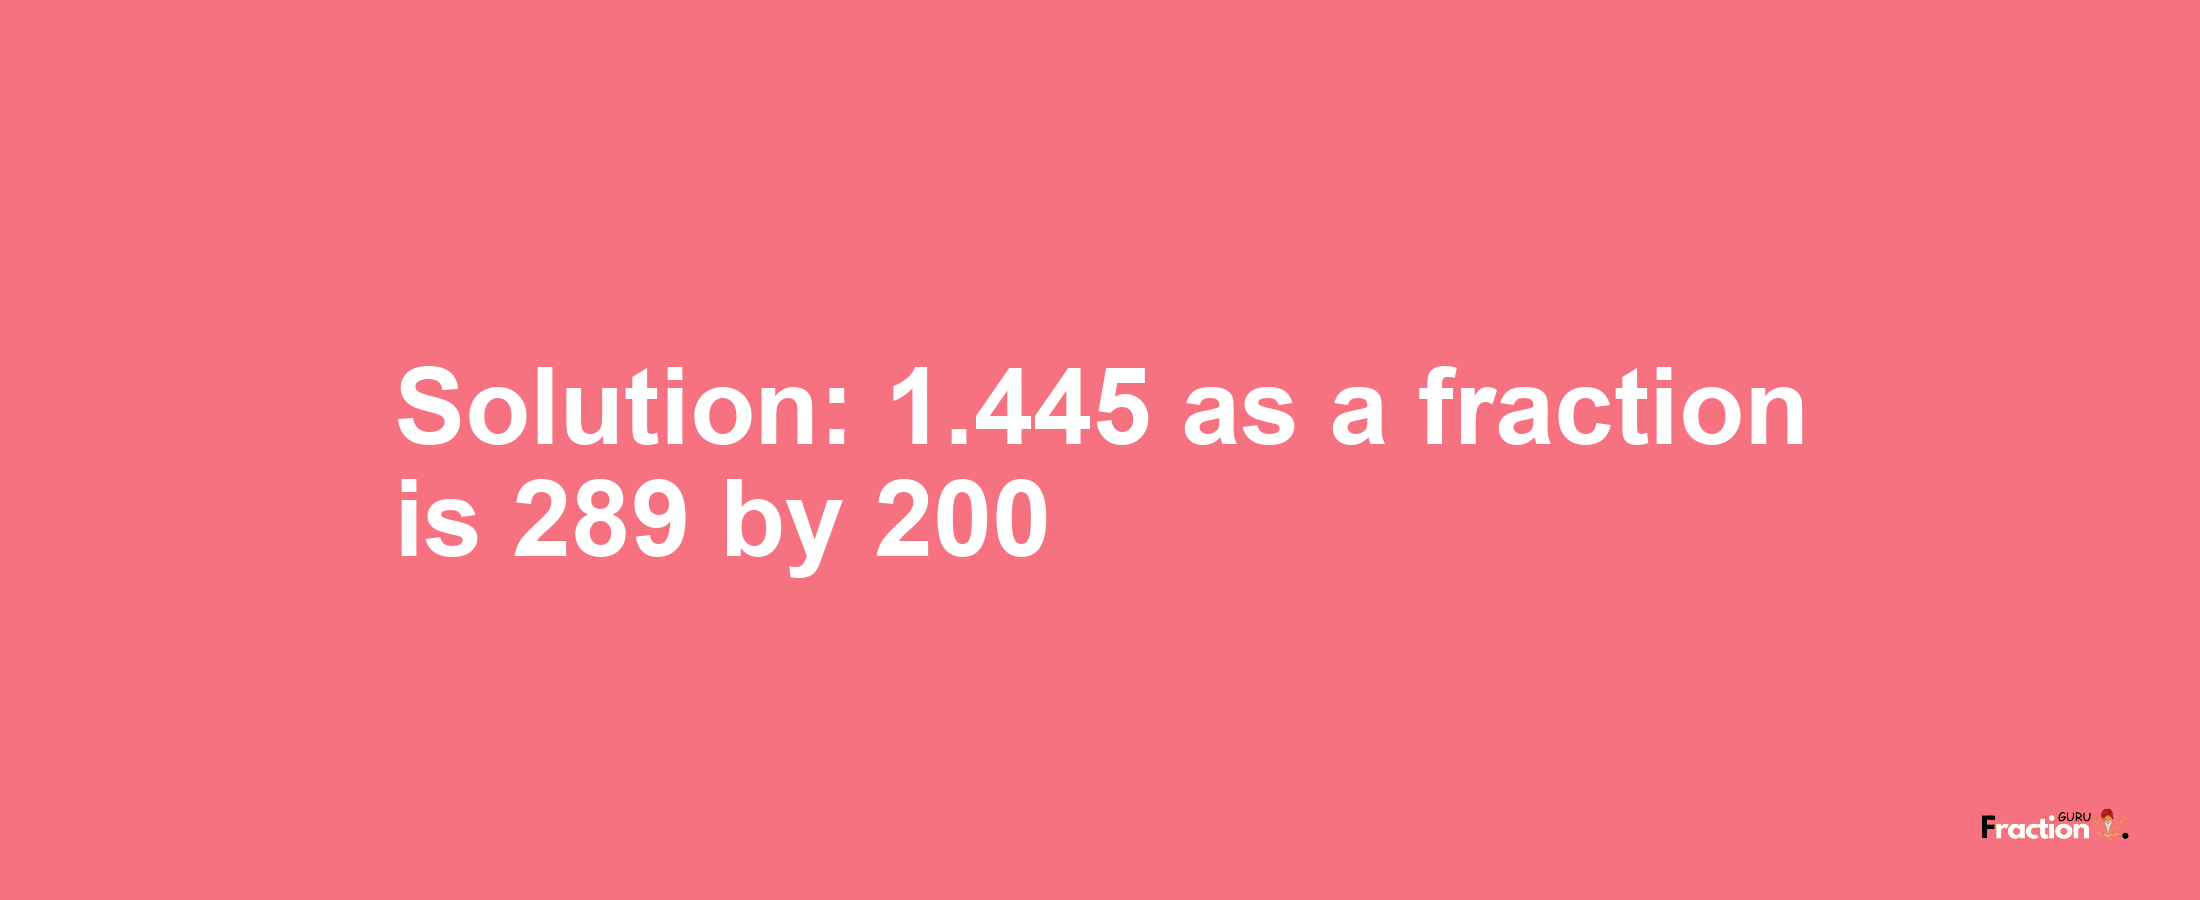 Solution:1.445 as a fraction is 289/200